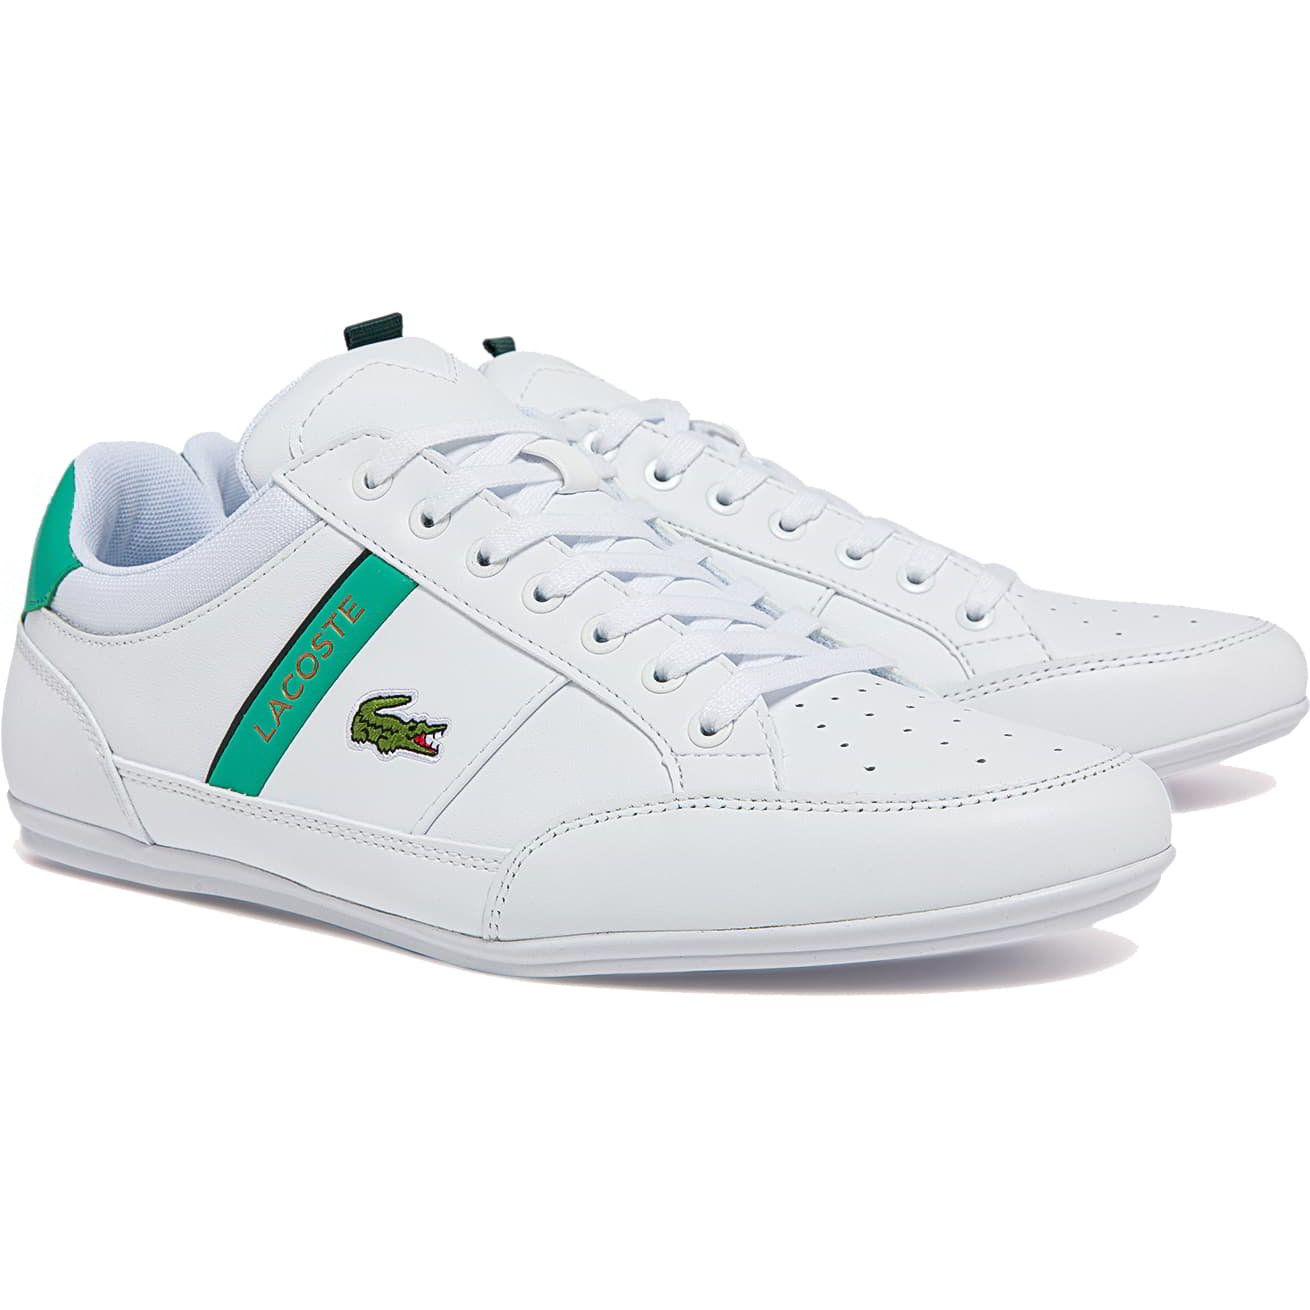 Lacoste Mens Chaymon 722-1 Leather Trainers - UK 8 White 2951